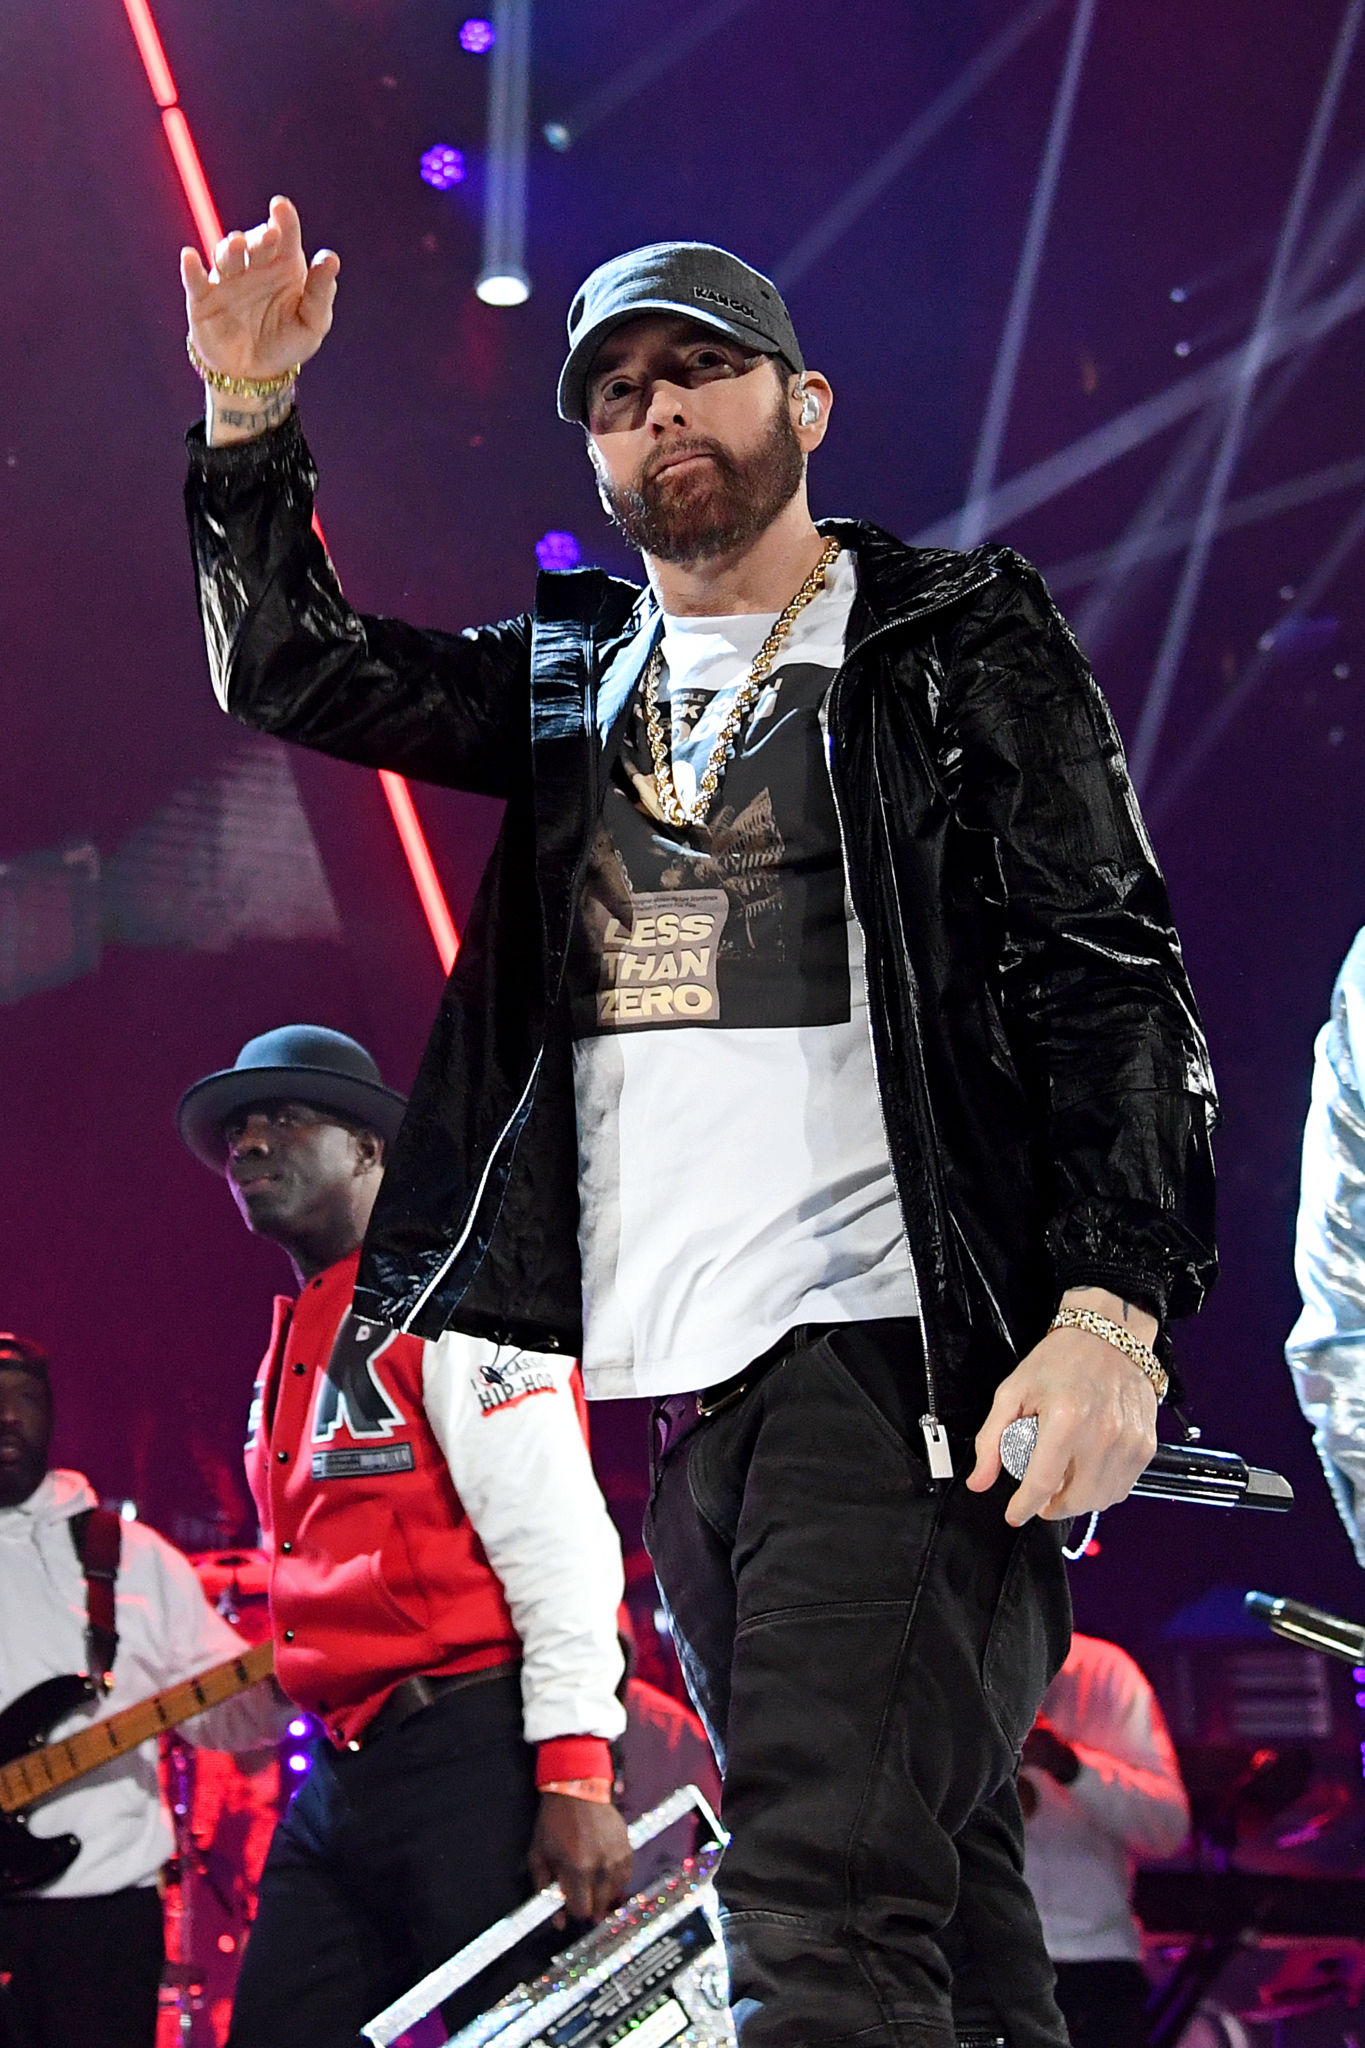 CLEVELAND, OHIO - OCTOBER 30: Eminem performs onstage during the 36th Annual Rock & Roll Hall Of Fame Induction Ceremony at Rocket Mortgage Fieldhouse on October 30, 2021 in Cleveland, Ohio. (Photo by Kevin Mazur/Getty Images for The Rock and Roll Hall of Fame )